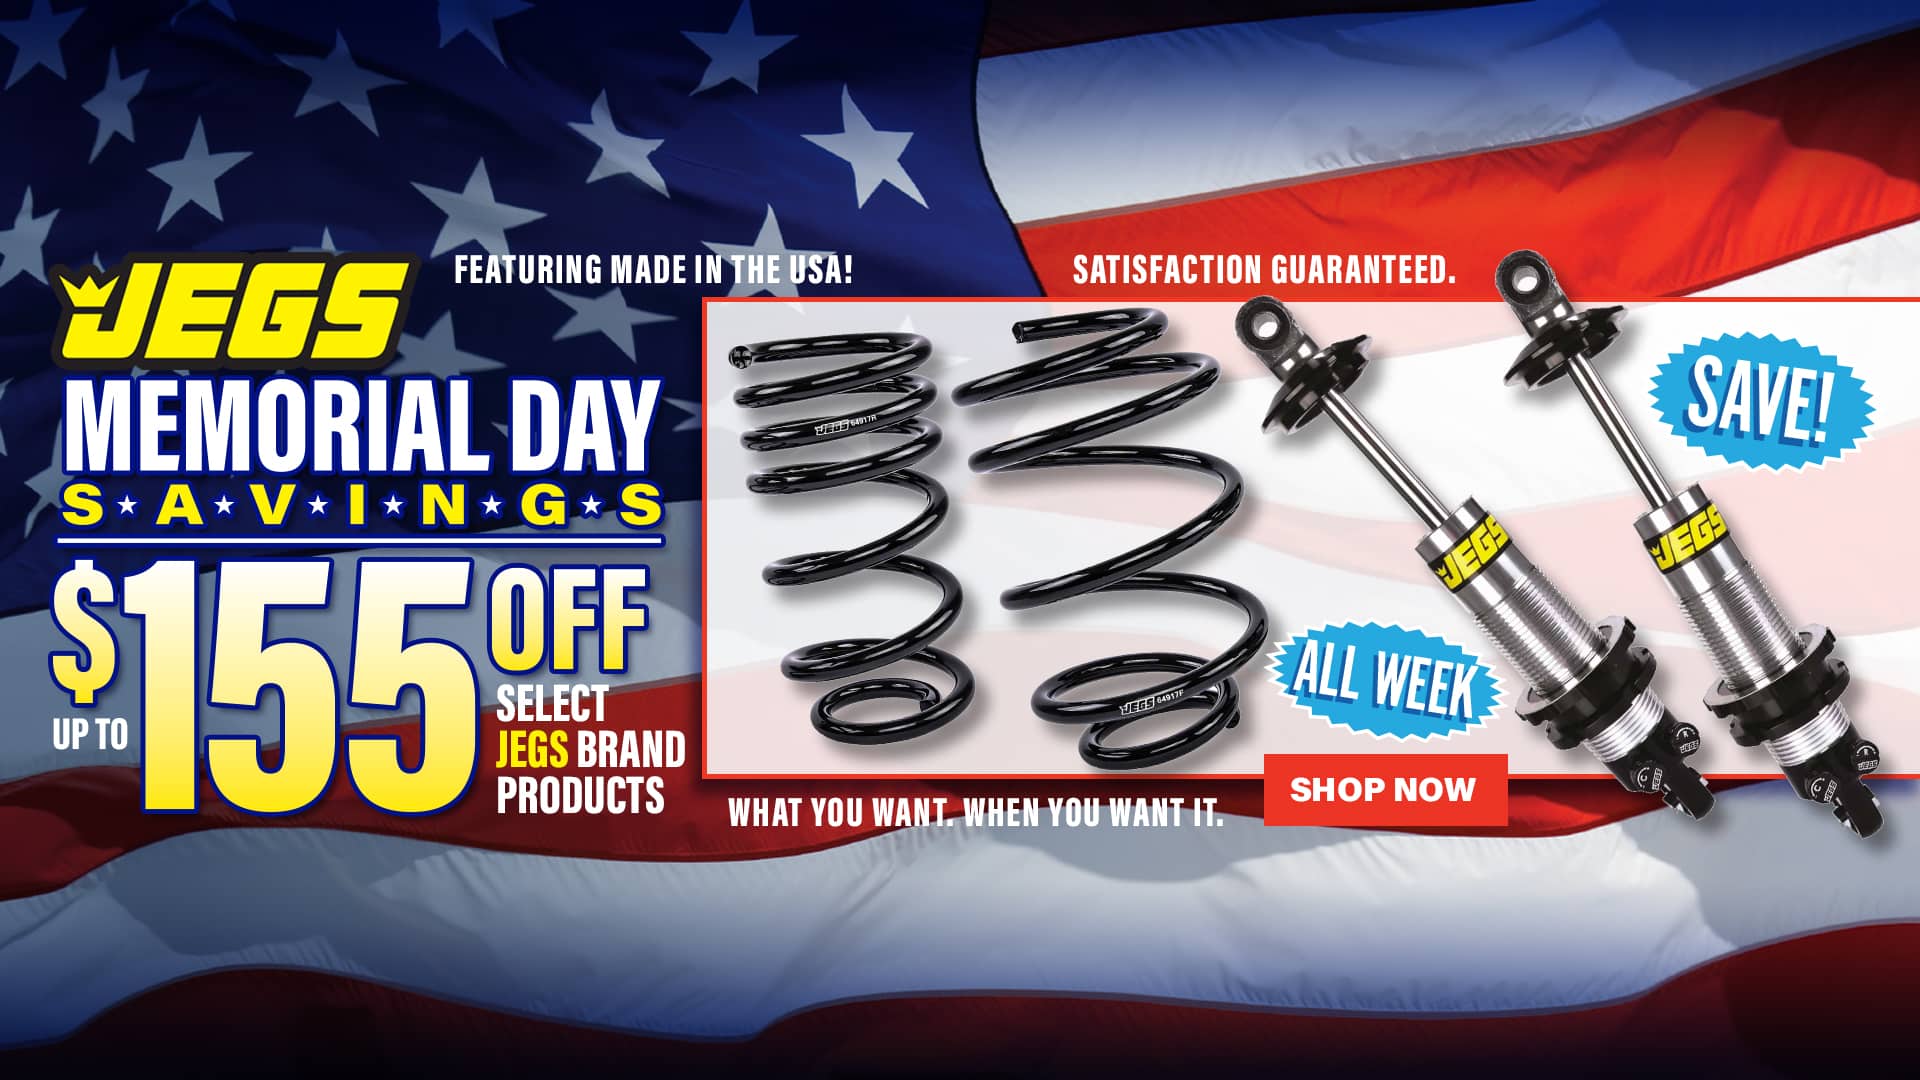 JEGS Memorial Day Savings - Up To $155 Off Select JEGS Brand Products!